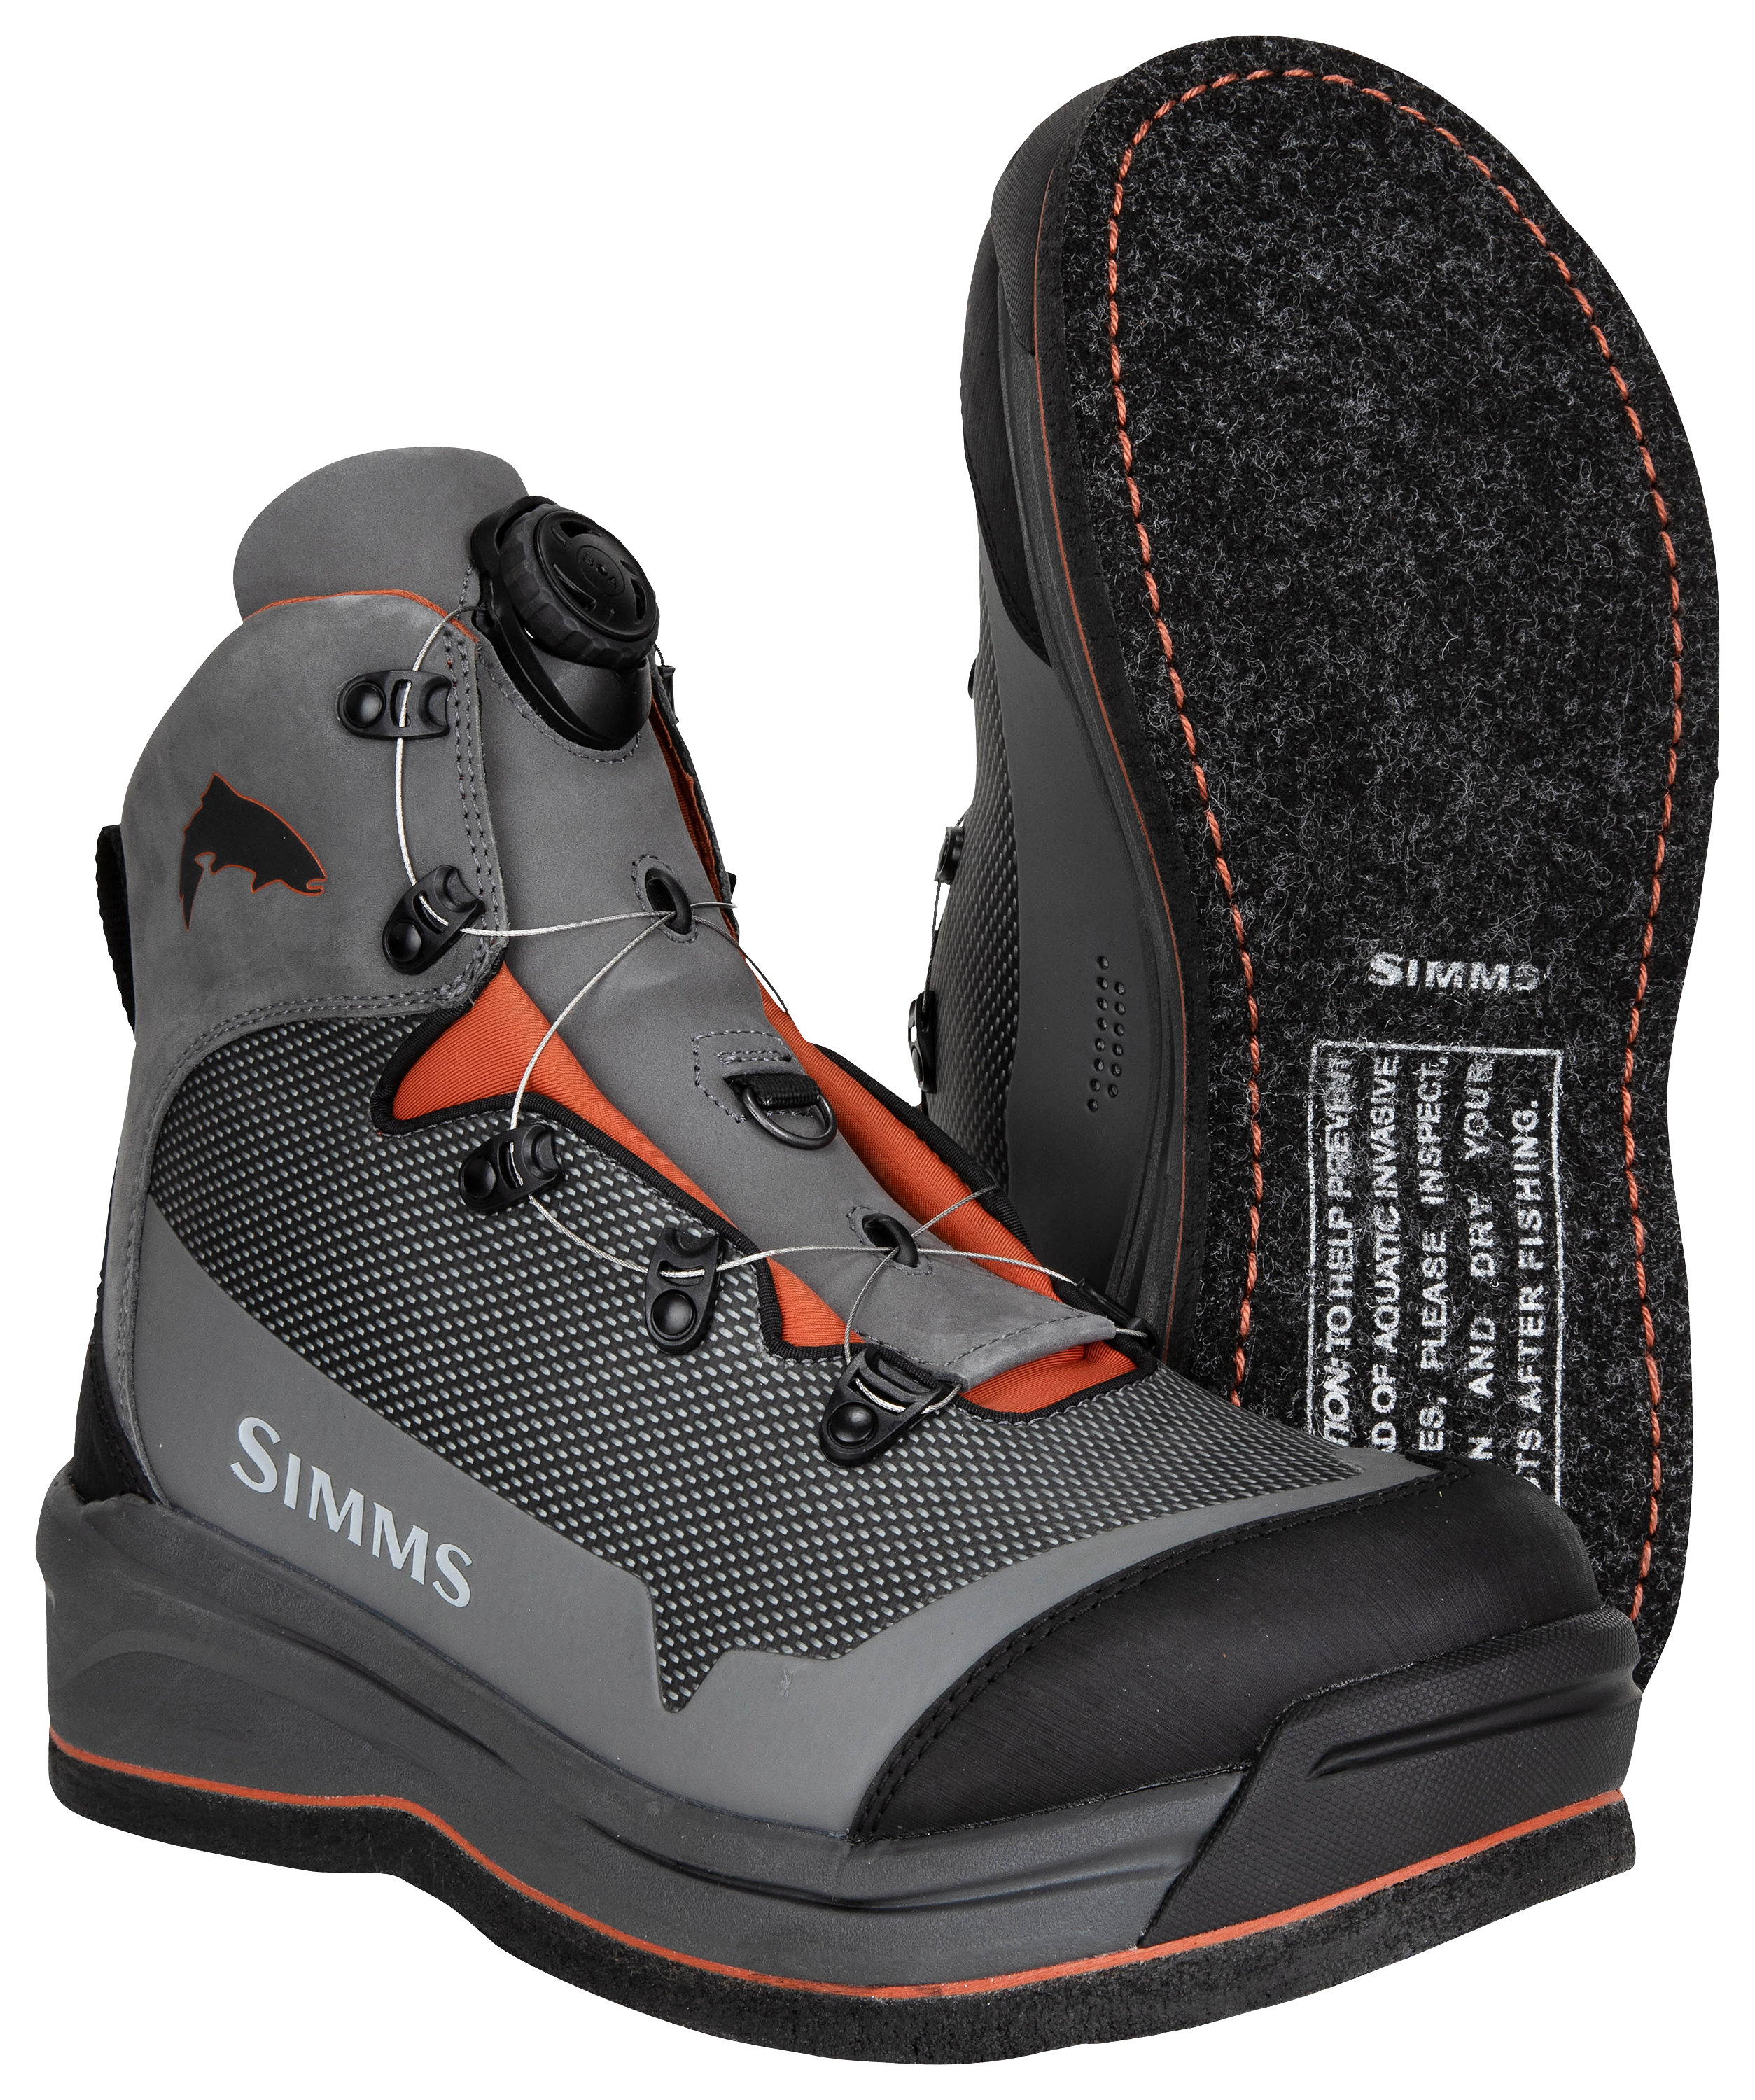 Simms Guide BOA Felt-Sole Wading Boots for Men